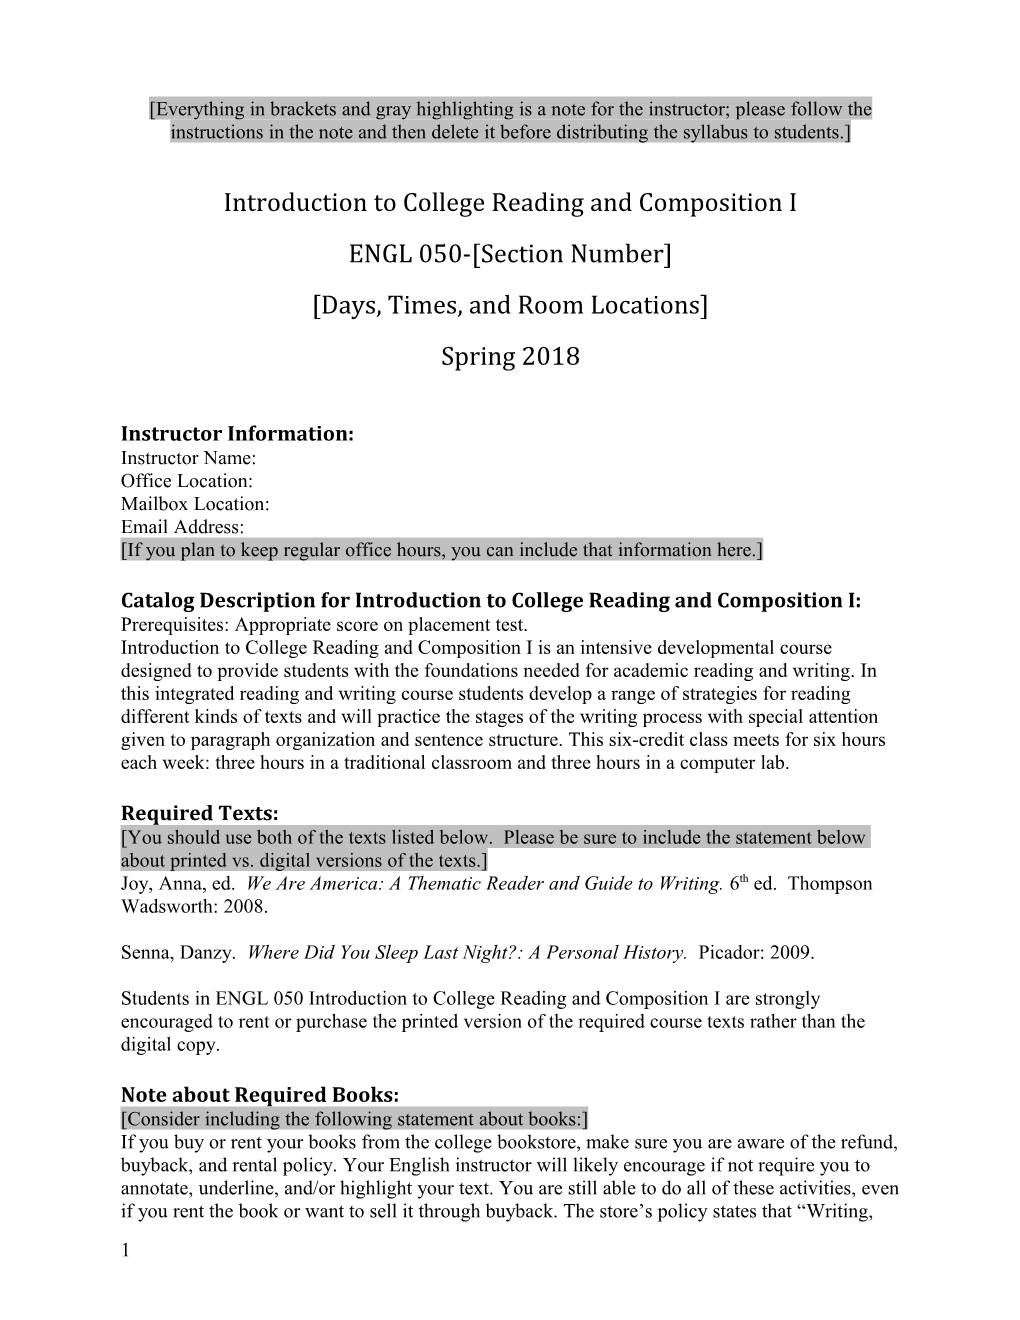 Introduction to College Reading and Composition I